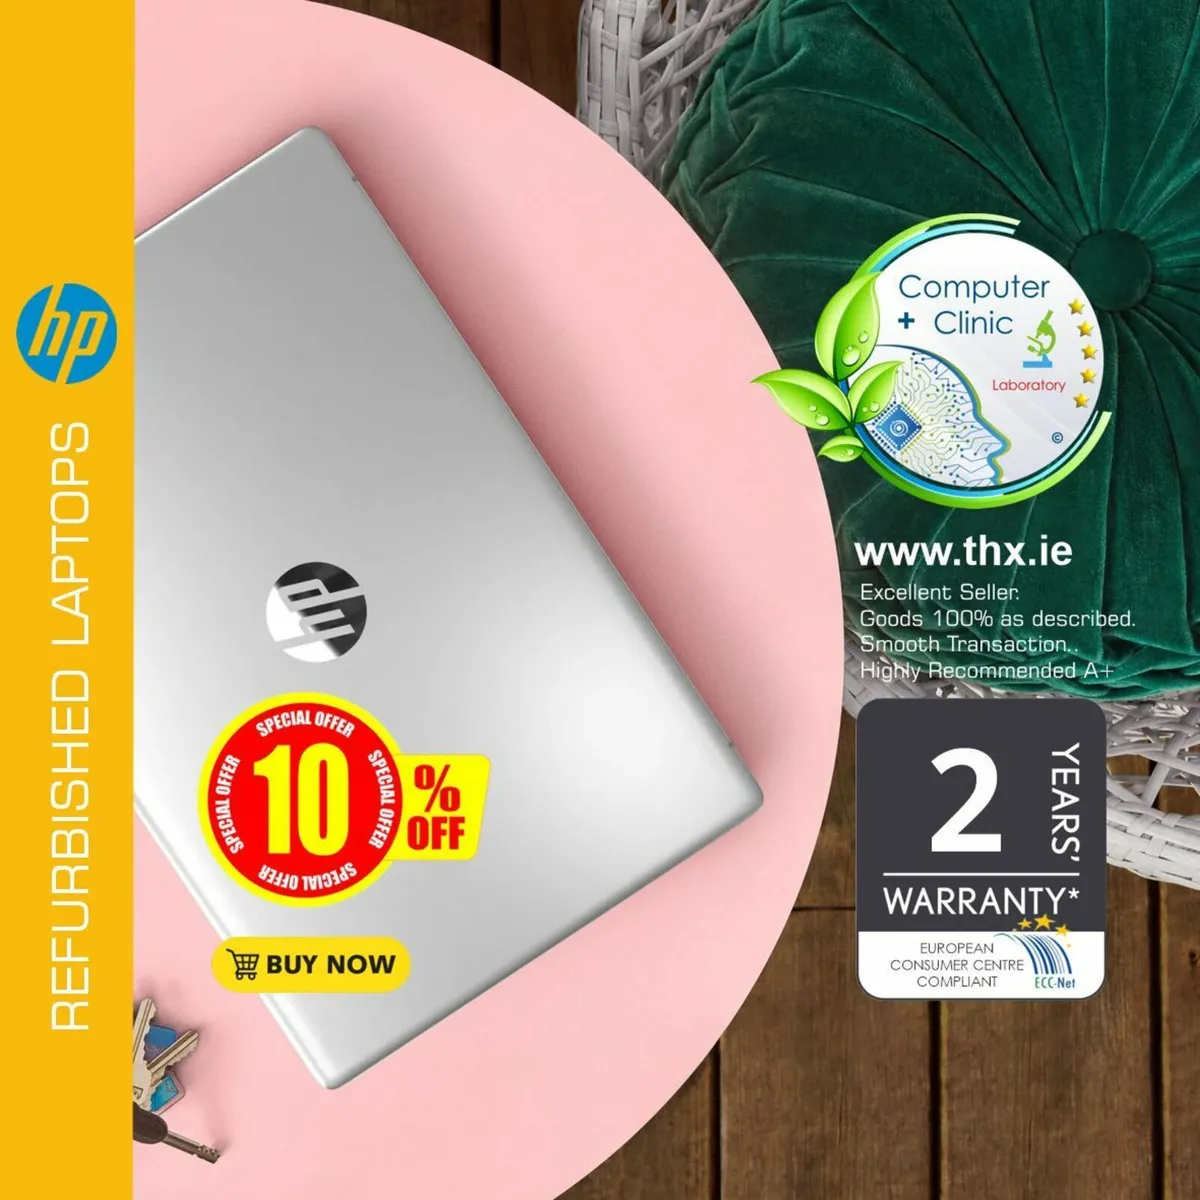 HP LAPTOPS ON SALE》 GET 10% DISCOUNT